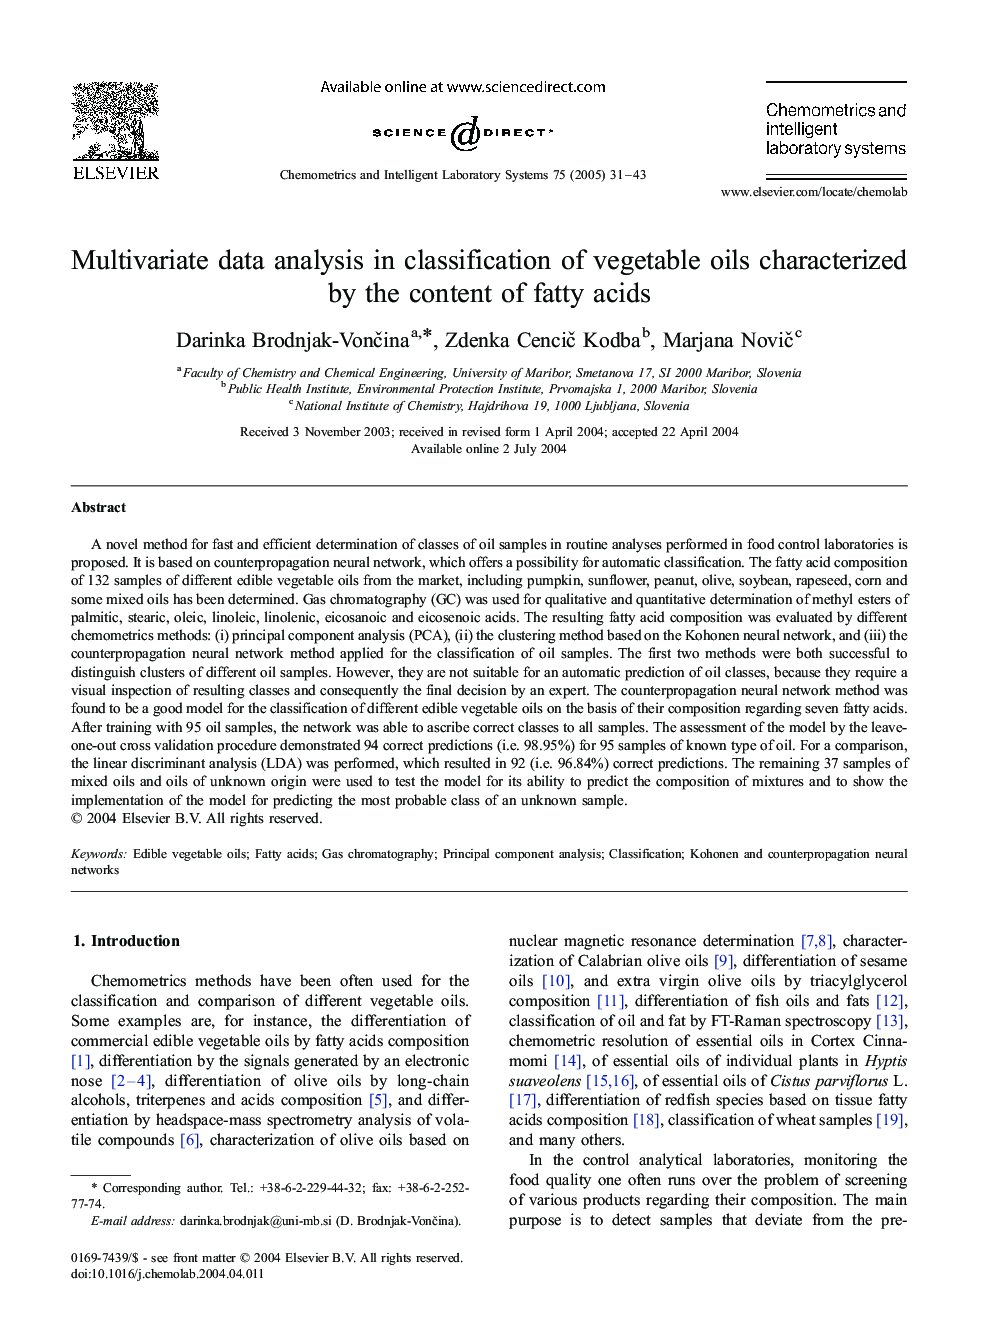 Multivariate data analysis in classification of vegetable oils characterized by the content of fatty acids